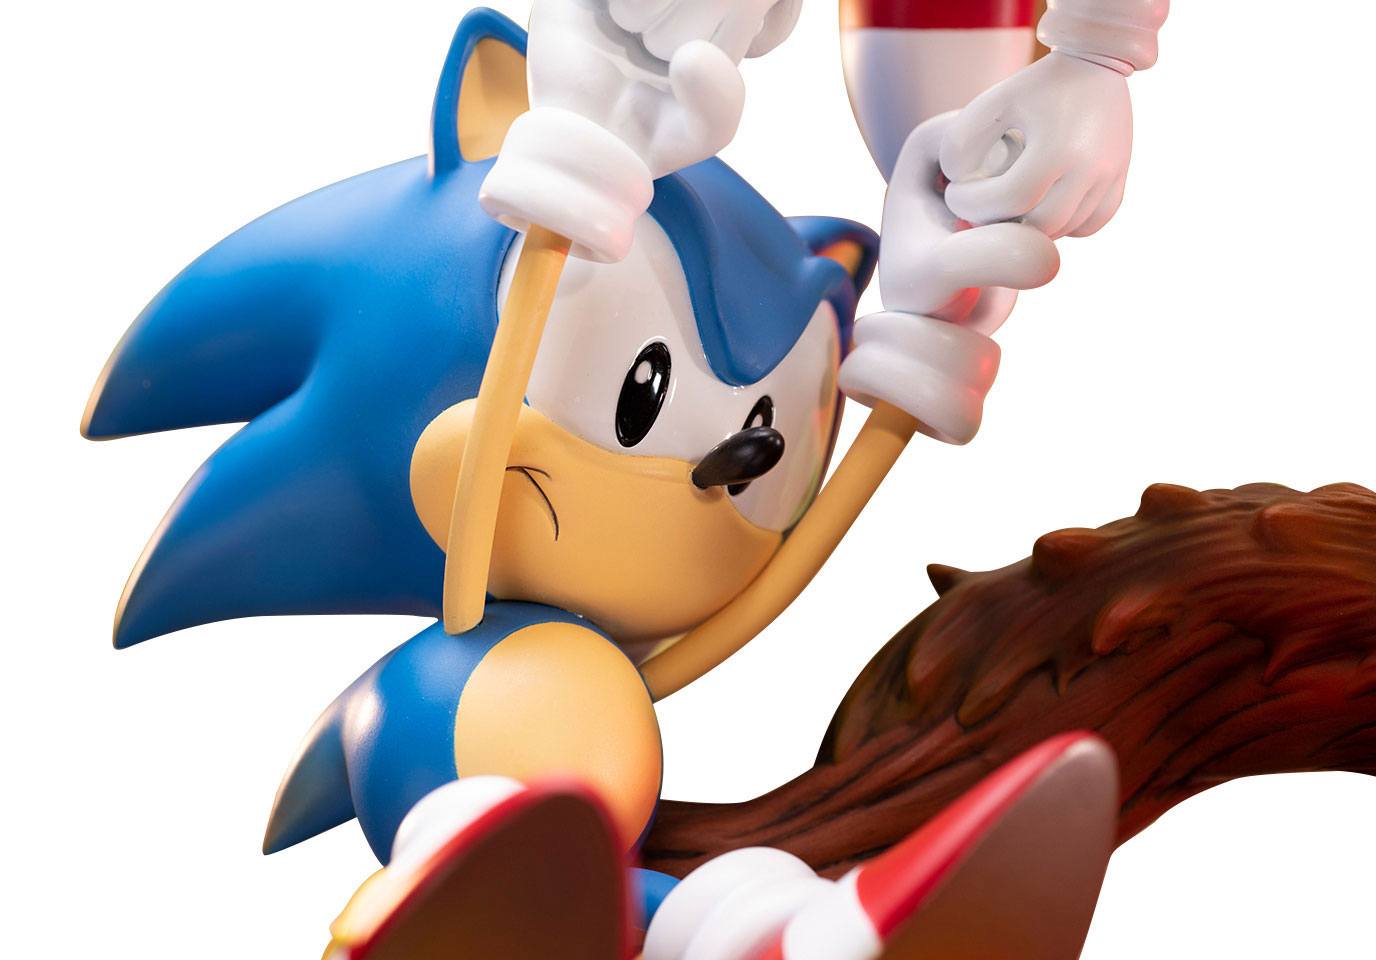 Sonic the Hedgehog Statue Sonic & Tails 51 cm